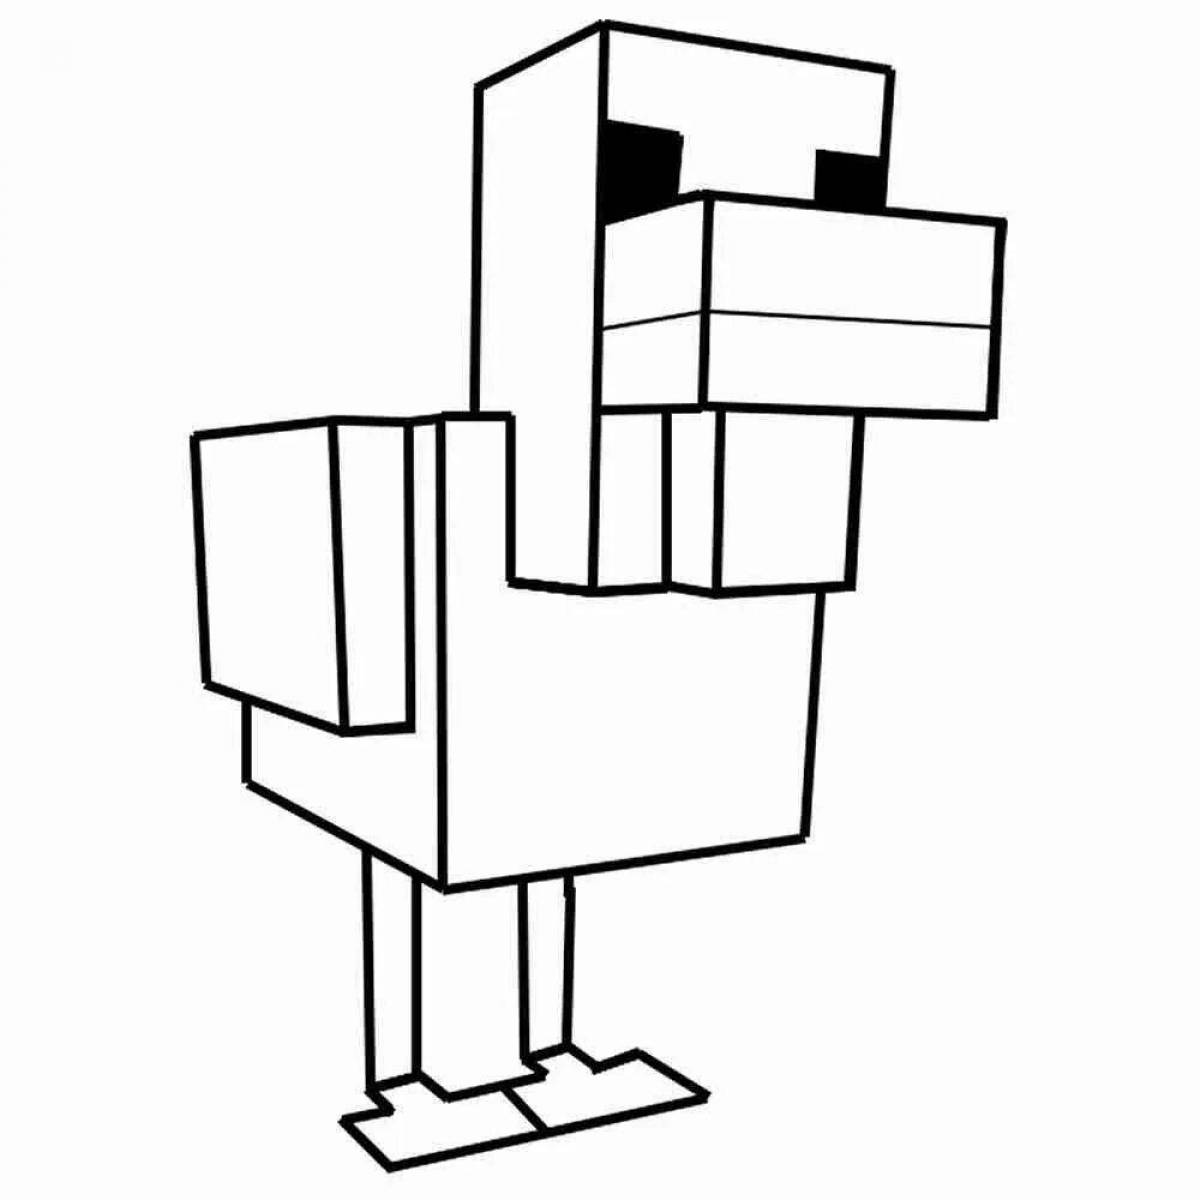 Exciting minecraft player coloring page